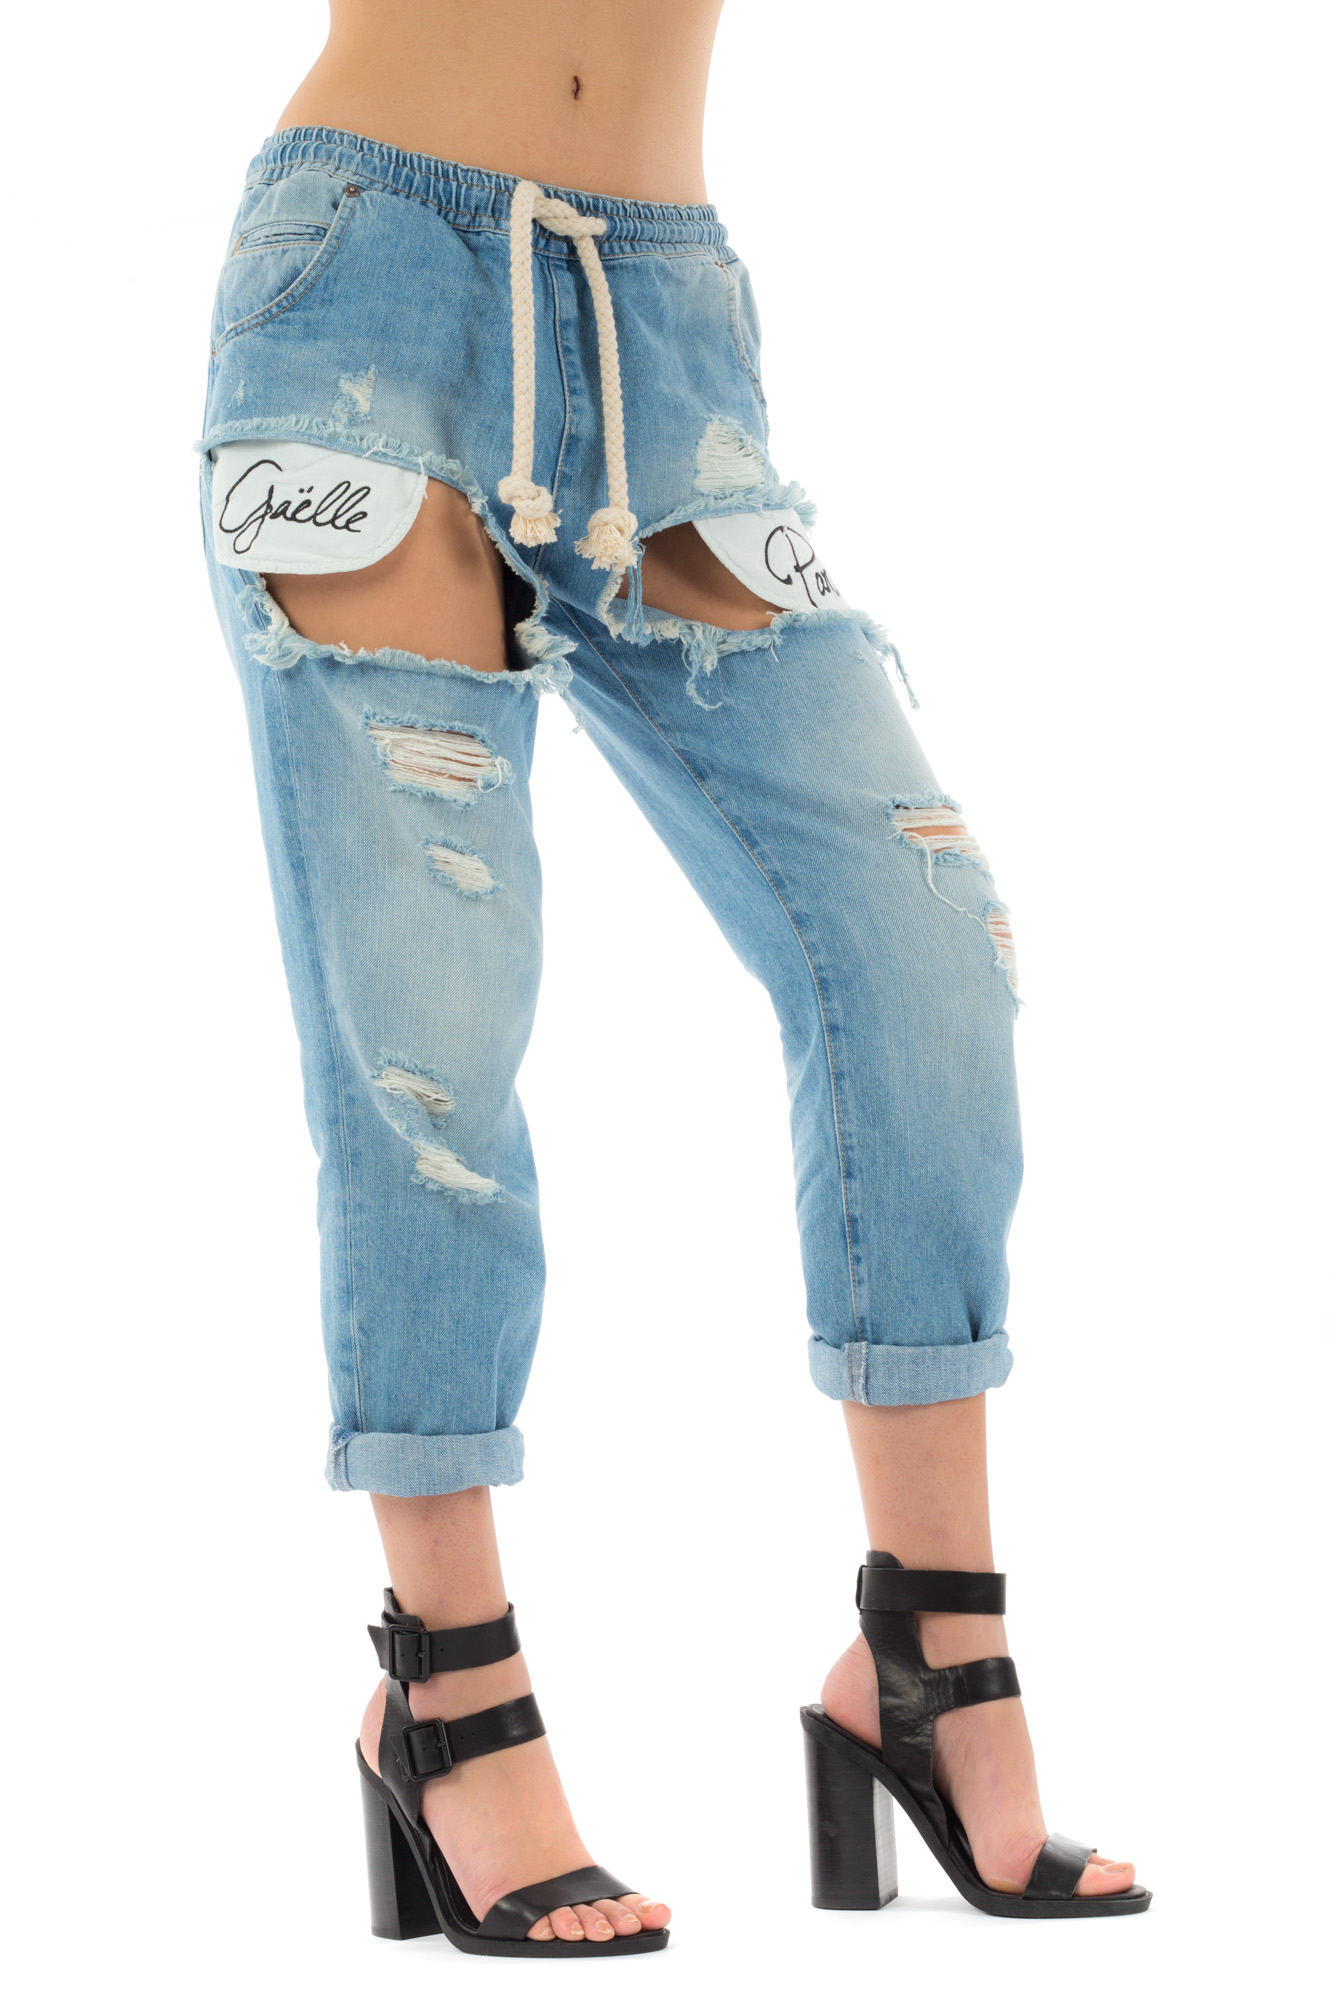 Gaelle - Ripped jeans with logo